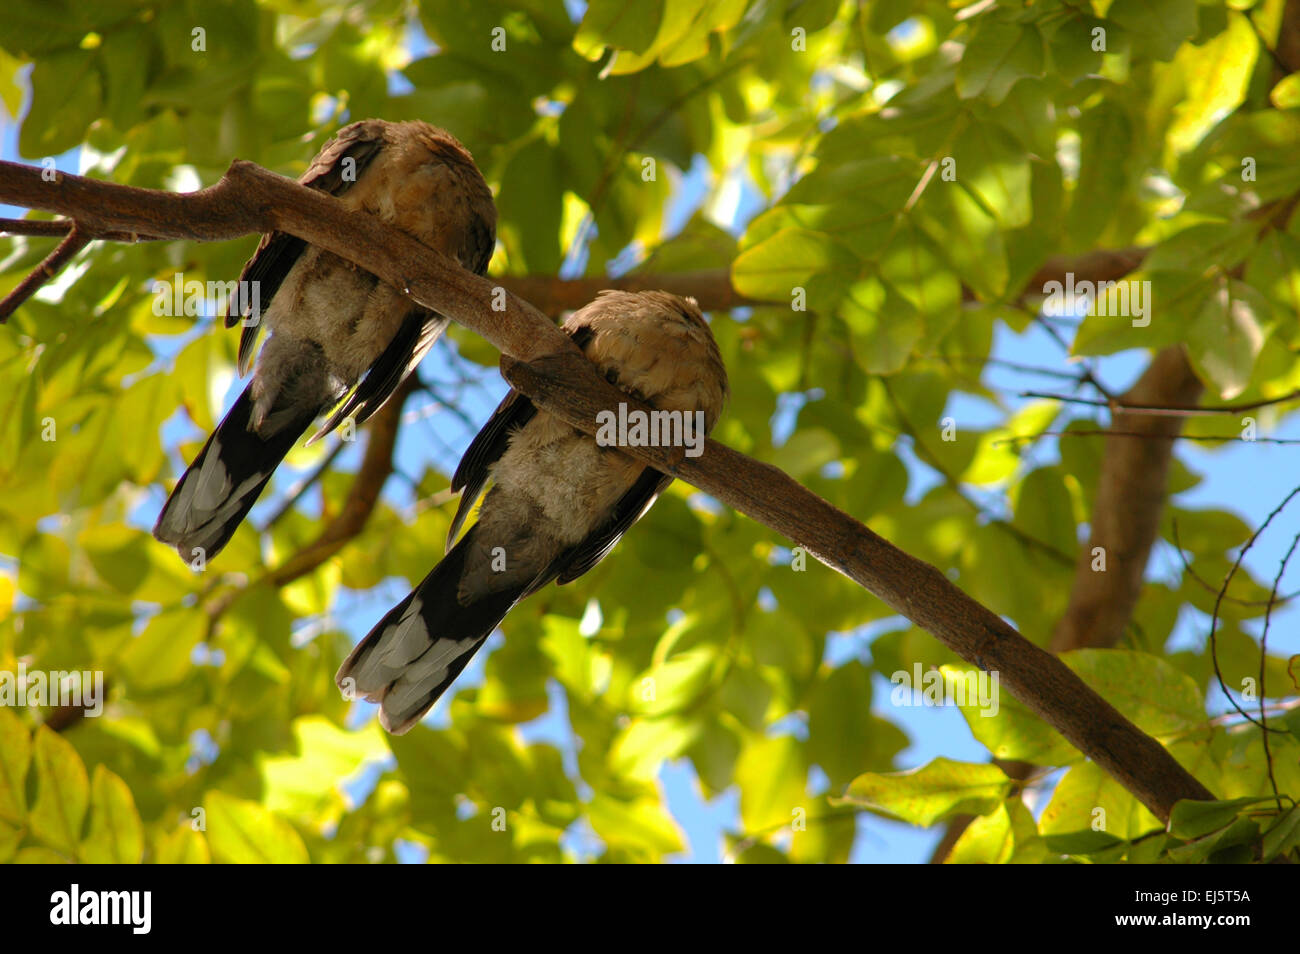 Two Birds Asleep On A Branch In A Tree Stock Photo